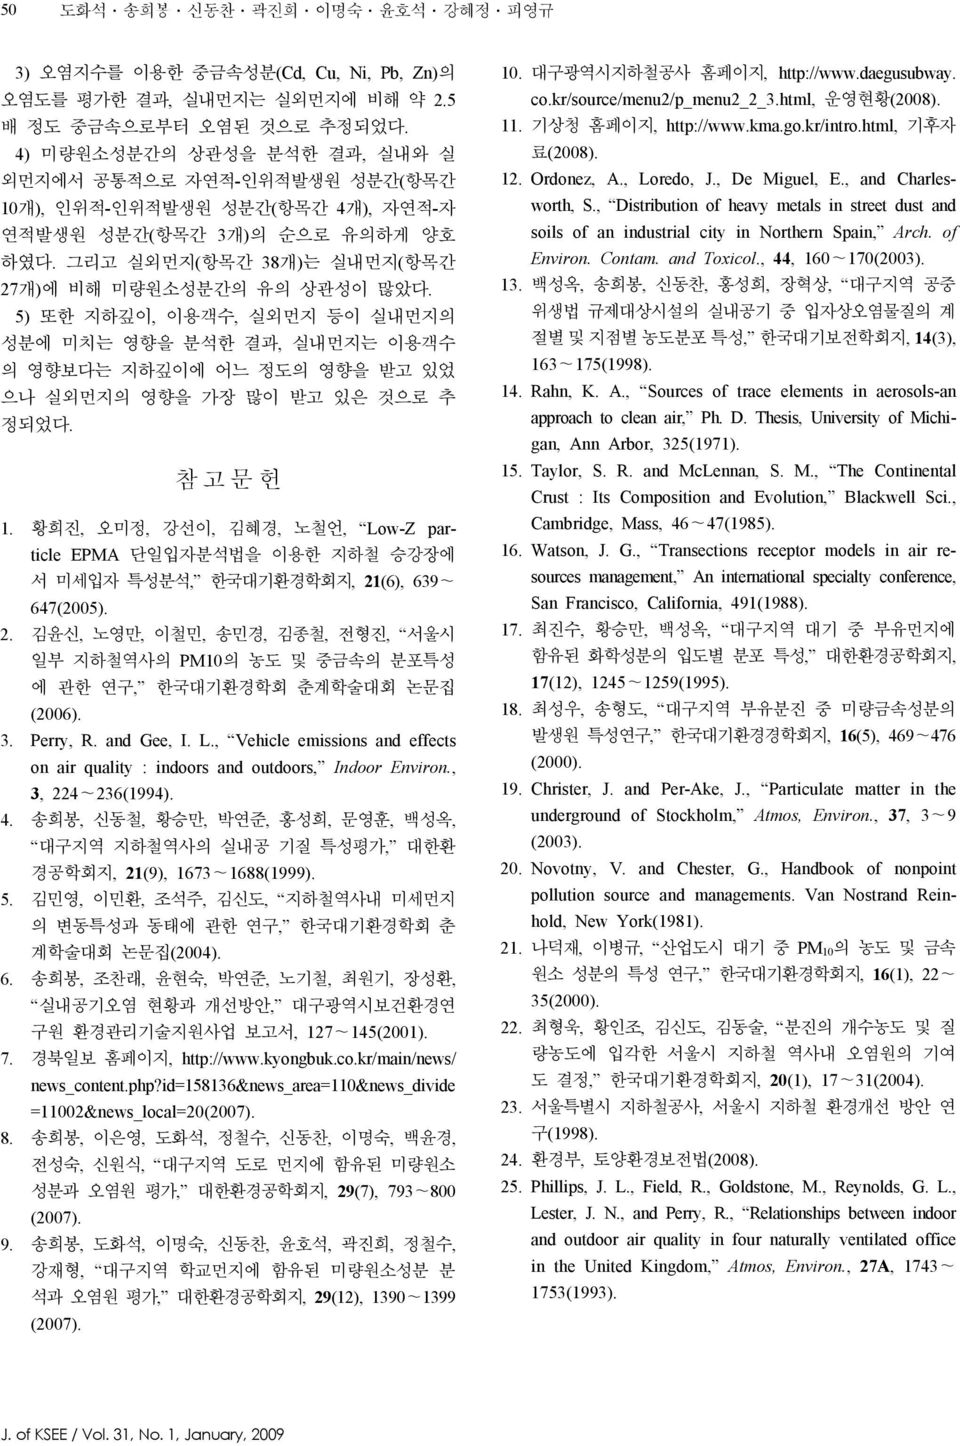 ,,,,,,,,, 127 145(2001). 7., http://www.kyongbuk.co.kr/main/news/ news_content.php?id=158136&news_area=110&news_divide =11002&news_local=20(2007). 8.,,,,,,,,,,, 29(7), 793 800 (2007). 9.